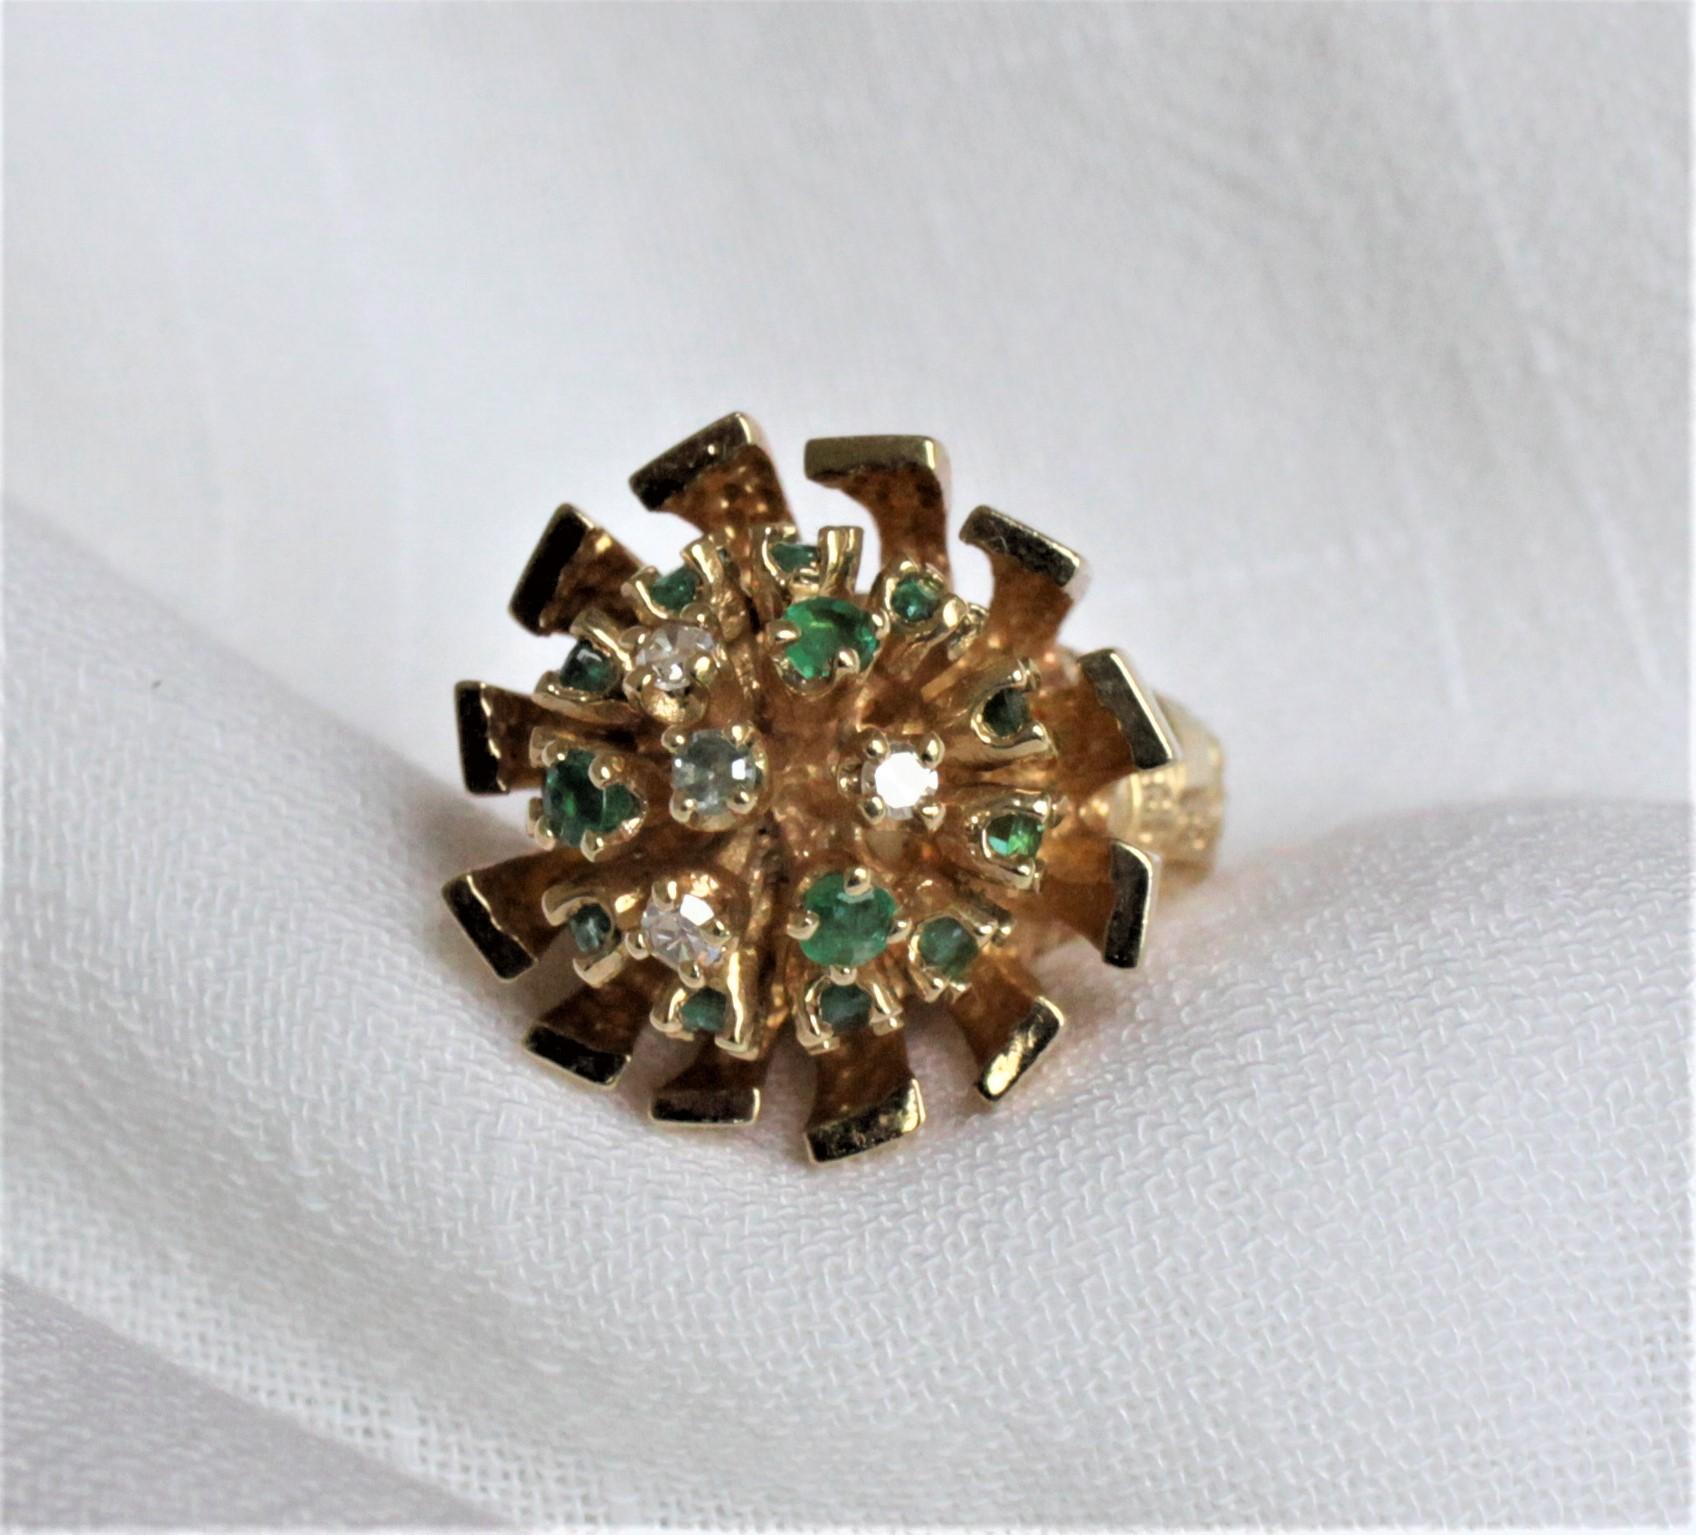 Hand-Crafted Large Ladies 14-Karat Yellow Gold Cocktail Ring with Diamonds, Emeralds & Beryls